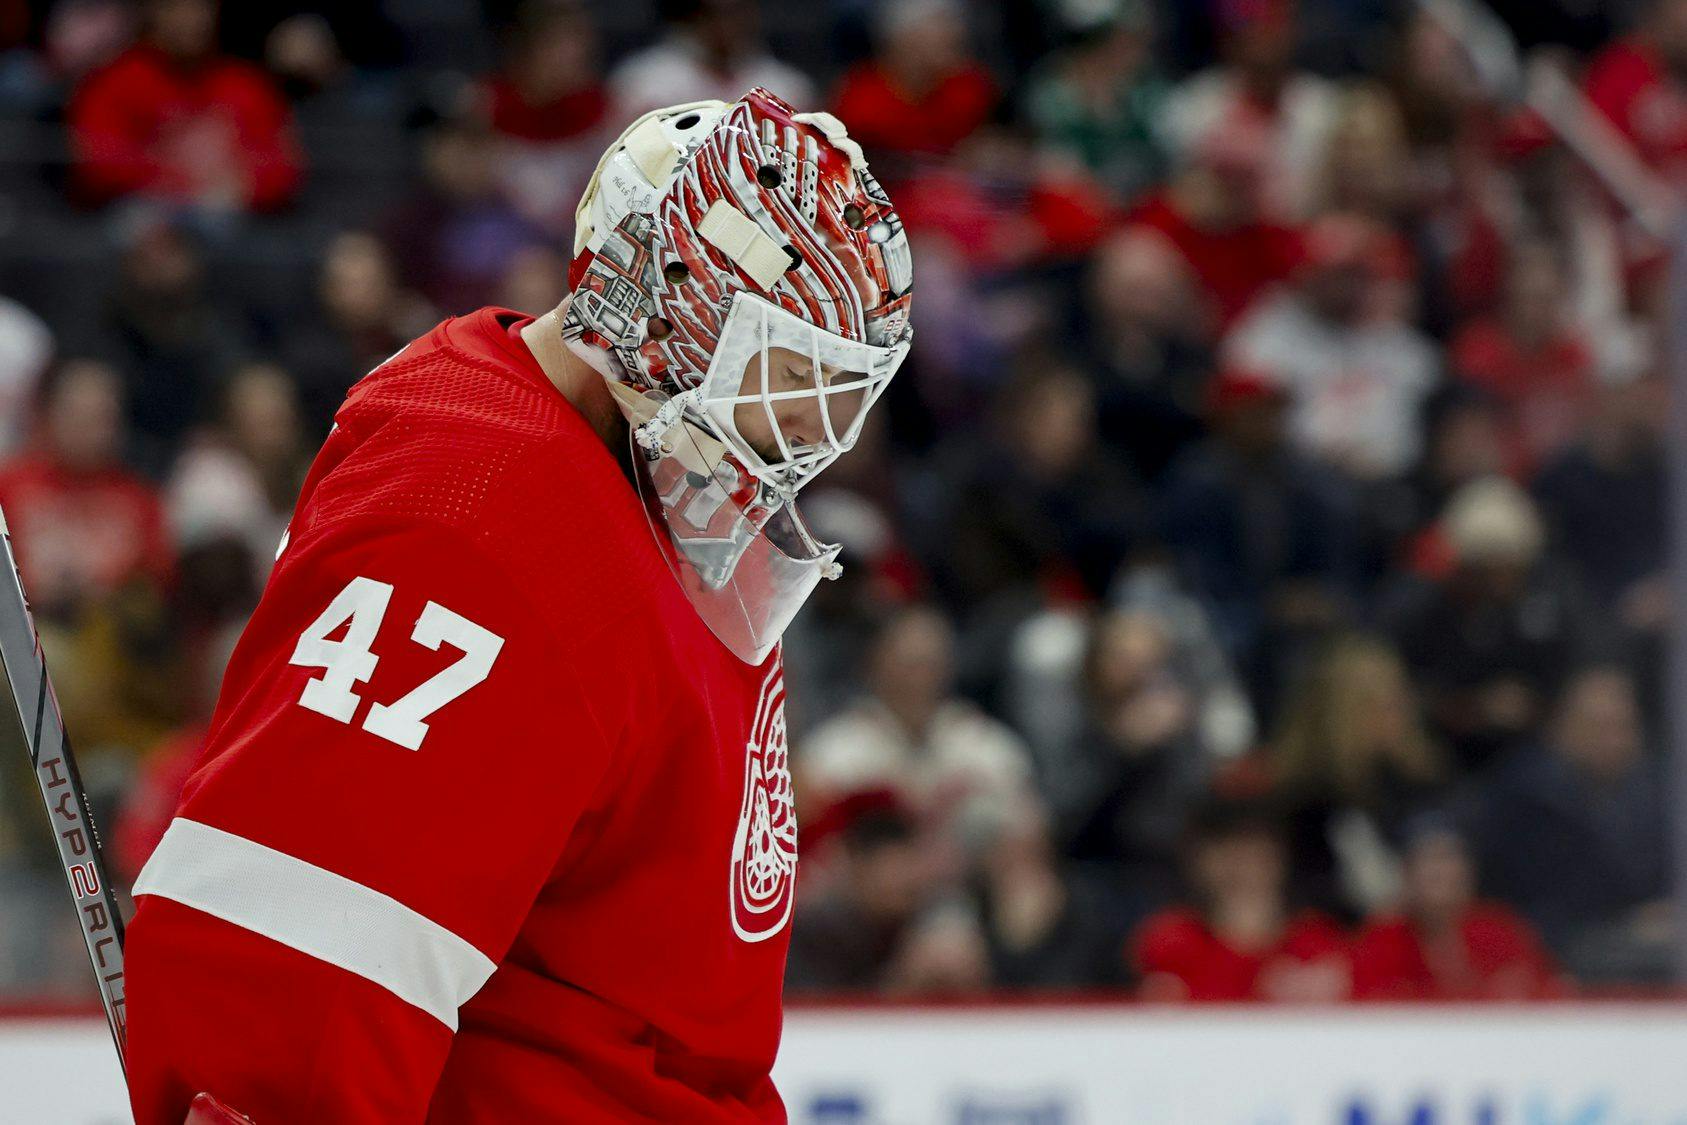 Detroit’s James Reimer could be an appealing low-cost goaltending option at the deadline